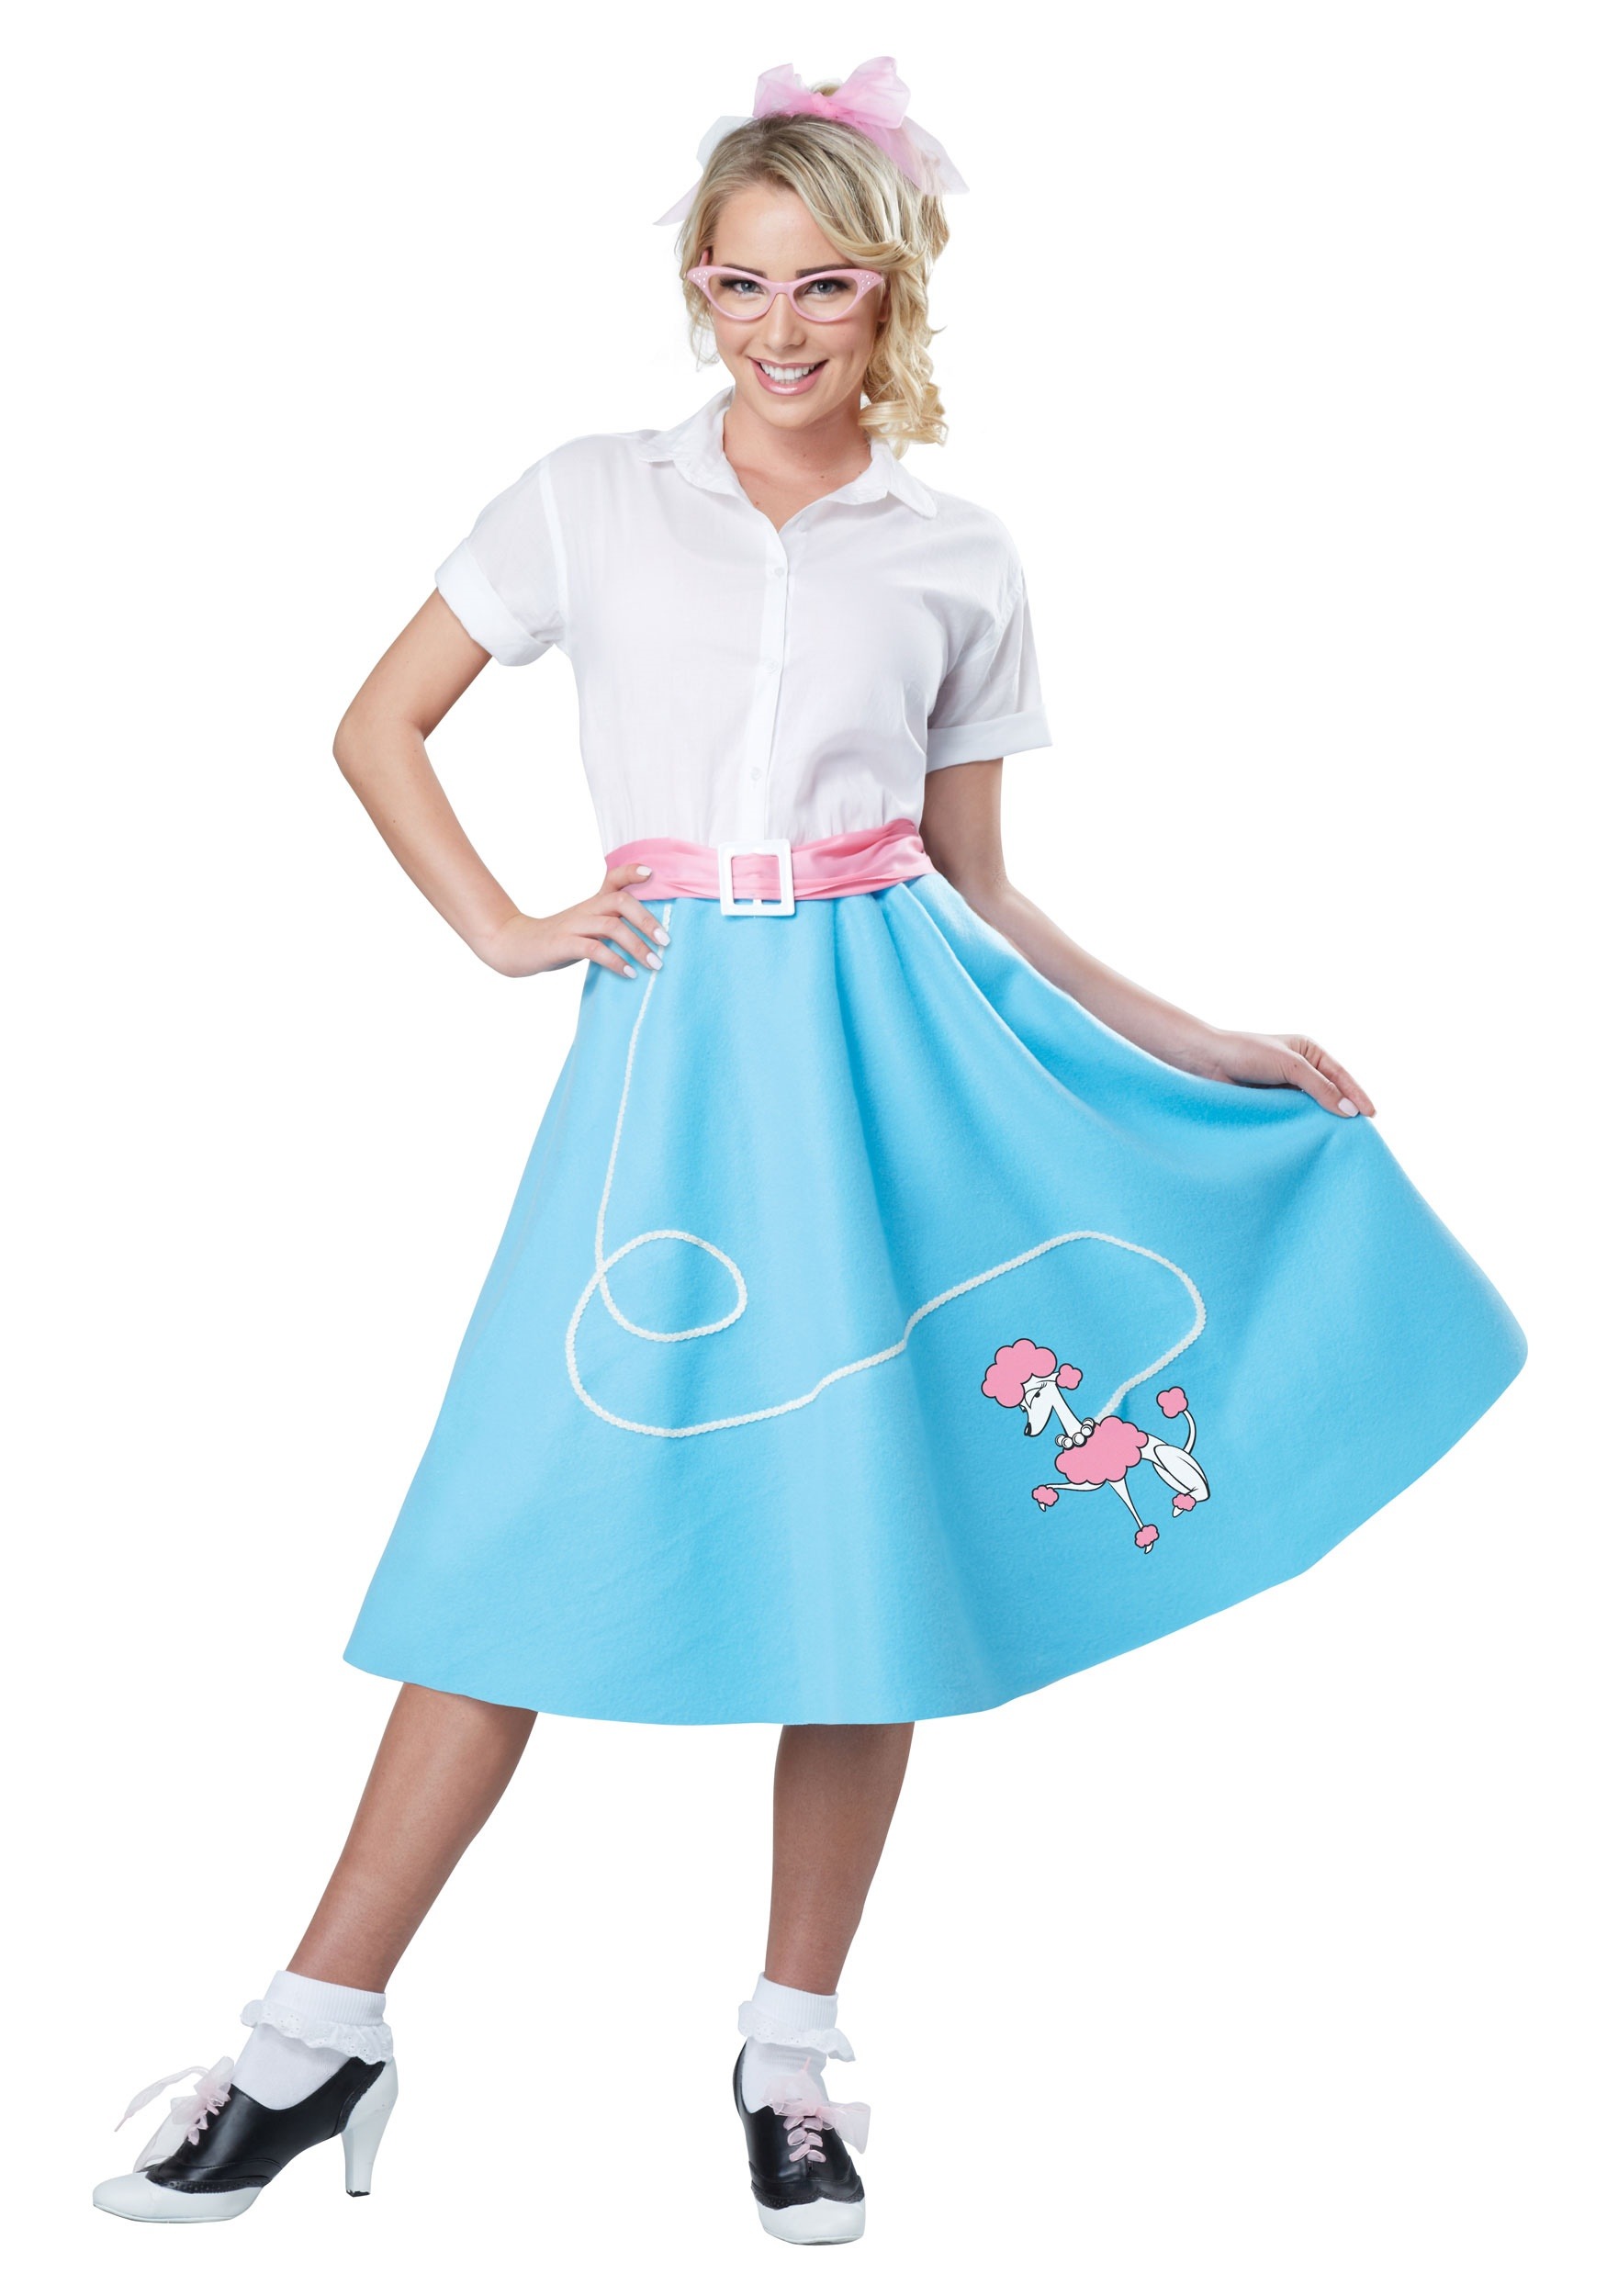 Blue '50s Poodle Skirt For Women Costume